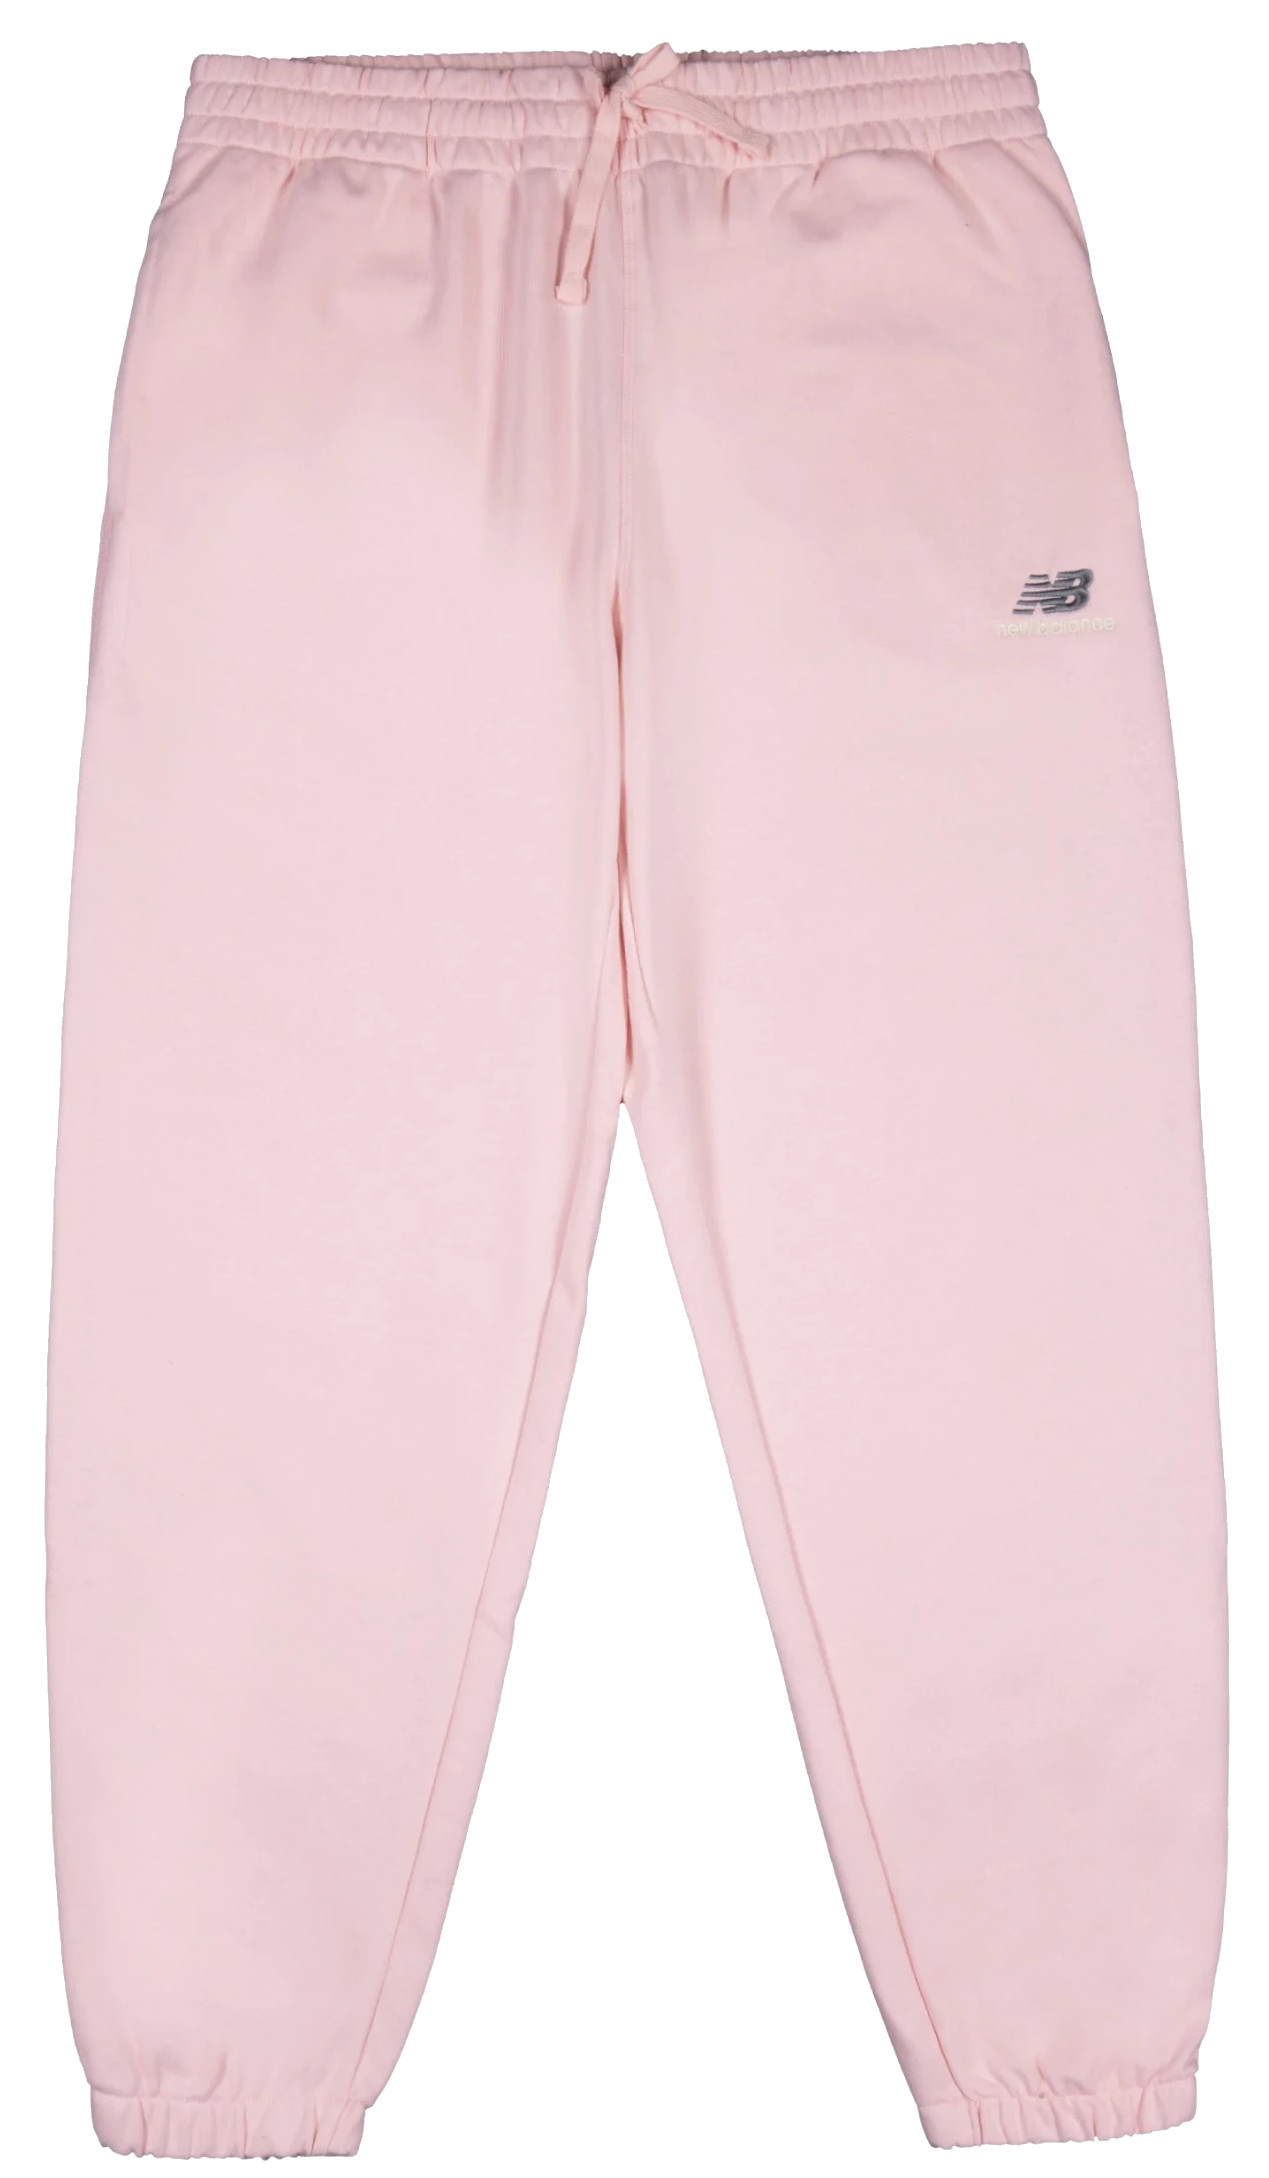 Pants New Balance Uni-ssentials French Terry Sweatpant